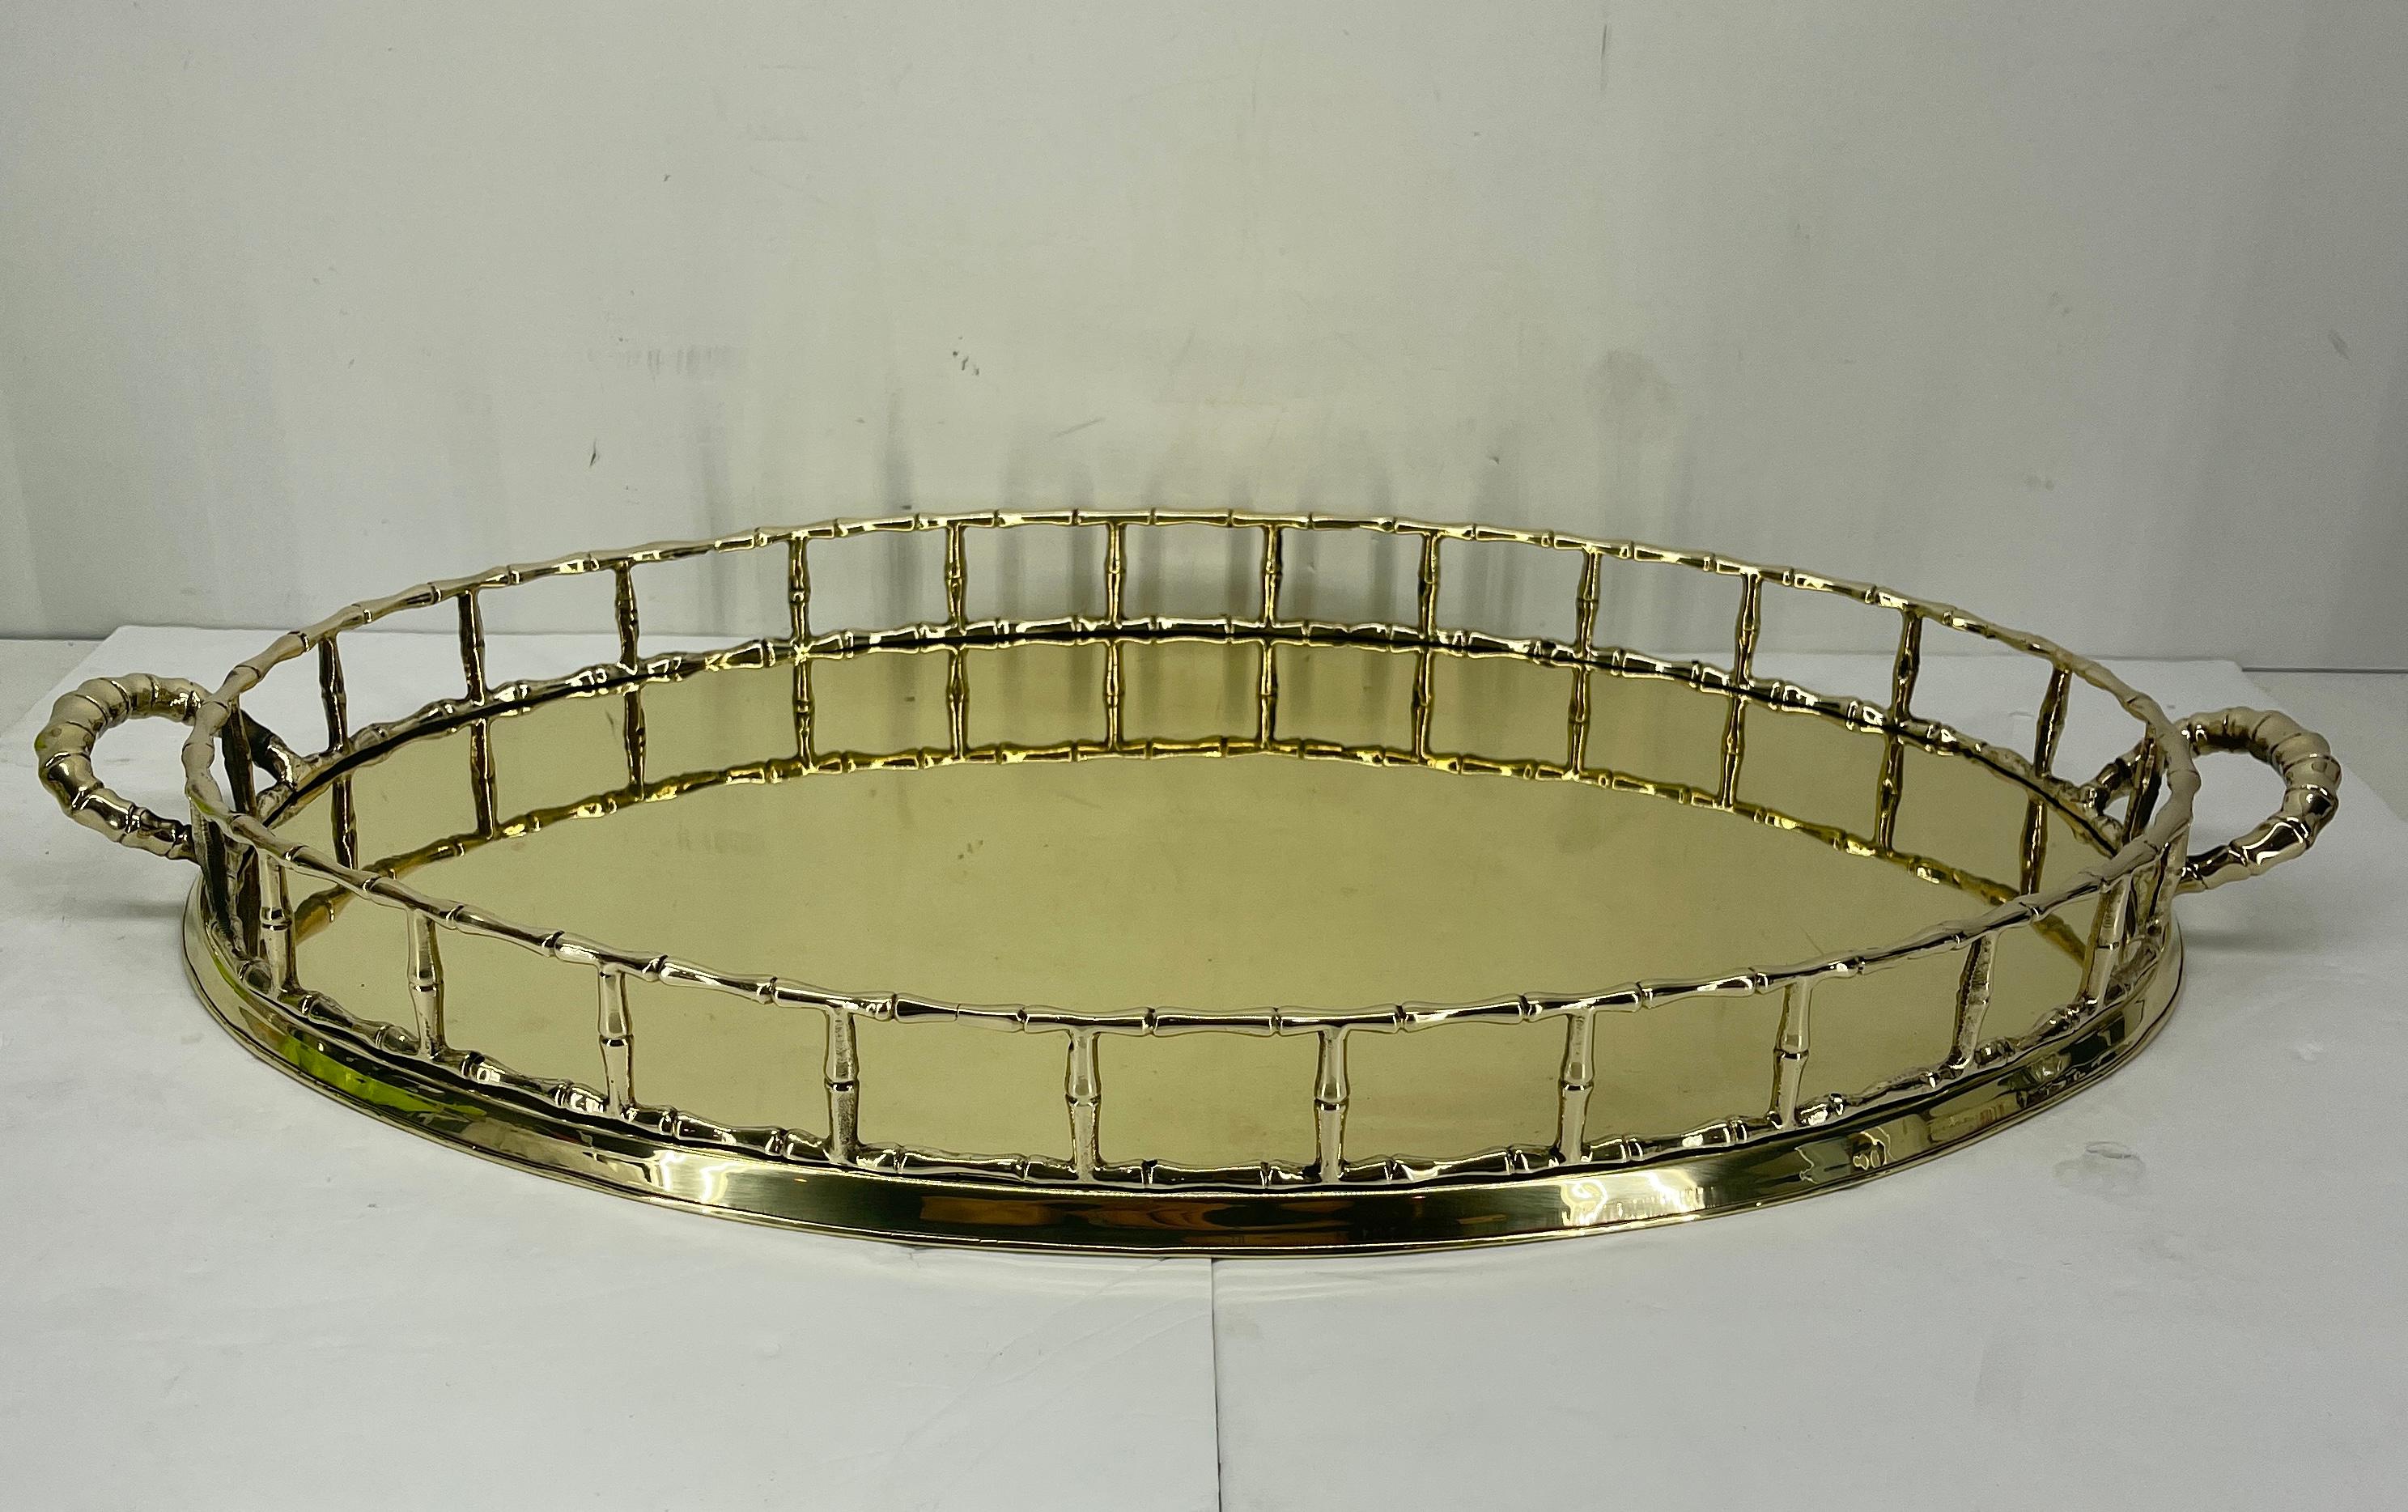 Vintage Hollywood Regency French serving tray. This beautiful polished brass faux bamboo oval tray is an excellent addition to your bar. The cocktail tray is elegant and timeless in style. The vintage large oval faux bamboo tray is regal and a